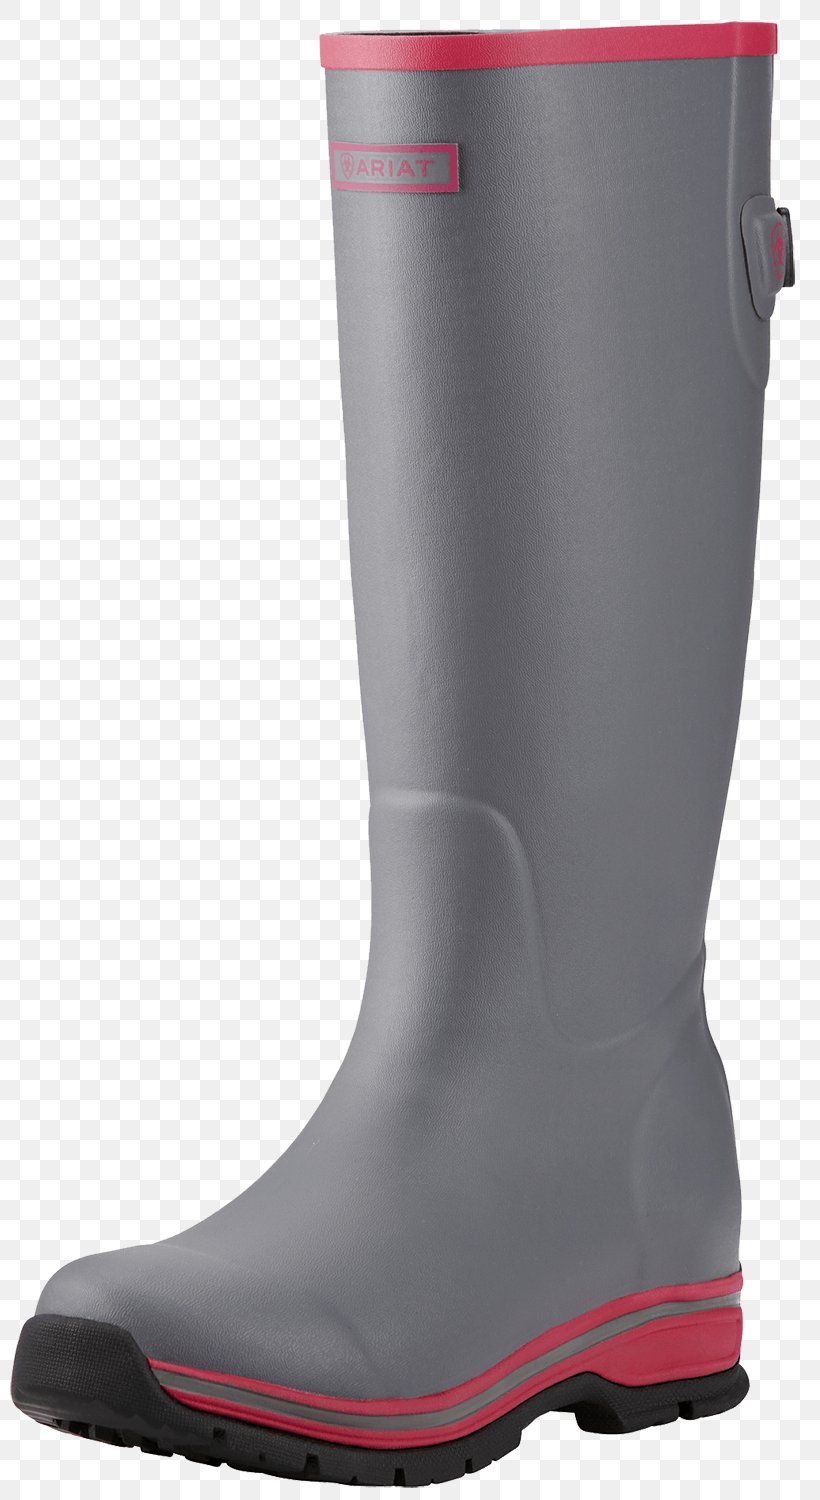 Snow Boot Shoe Wellington Boot, PNG, 809x1500px, Snow Boot, Ariat, Boot, Footwear, Outdoor Shoe Download Free